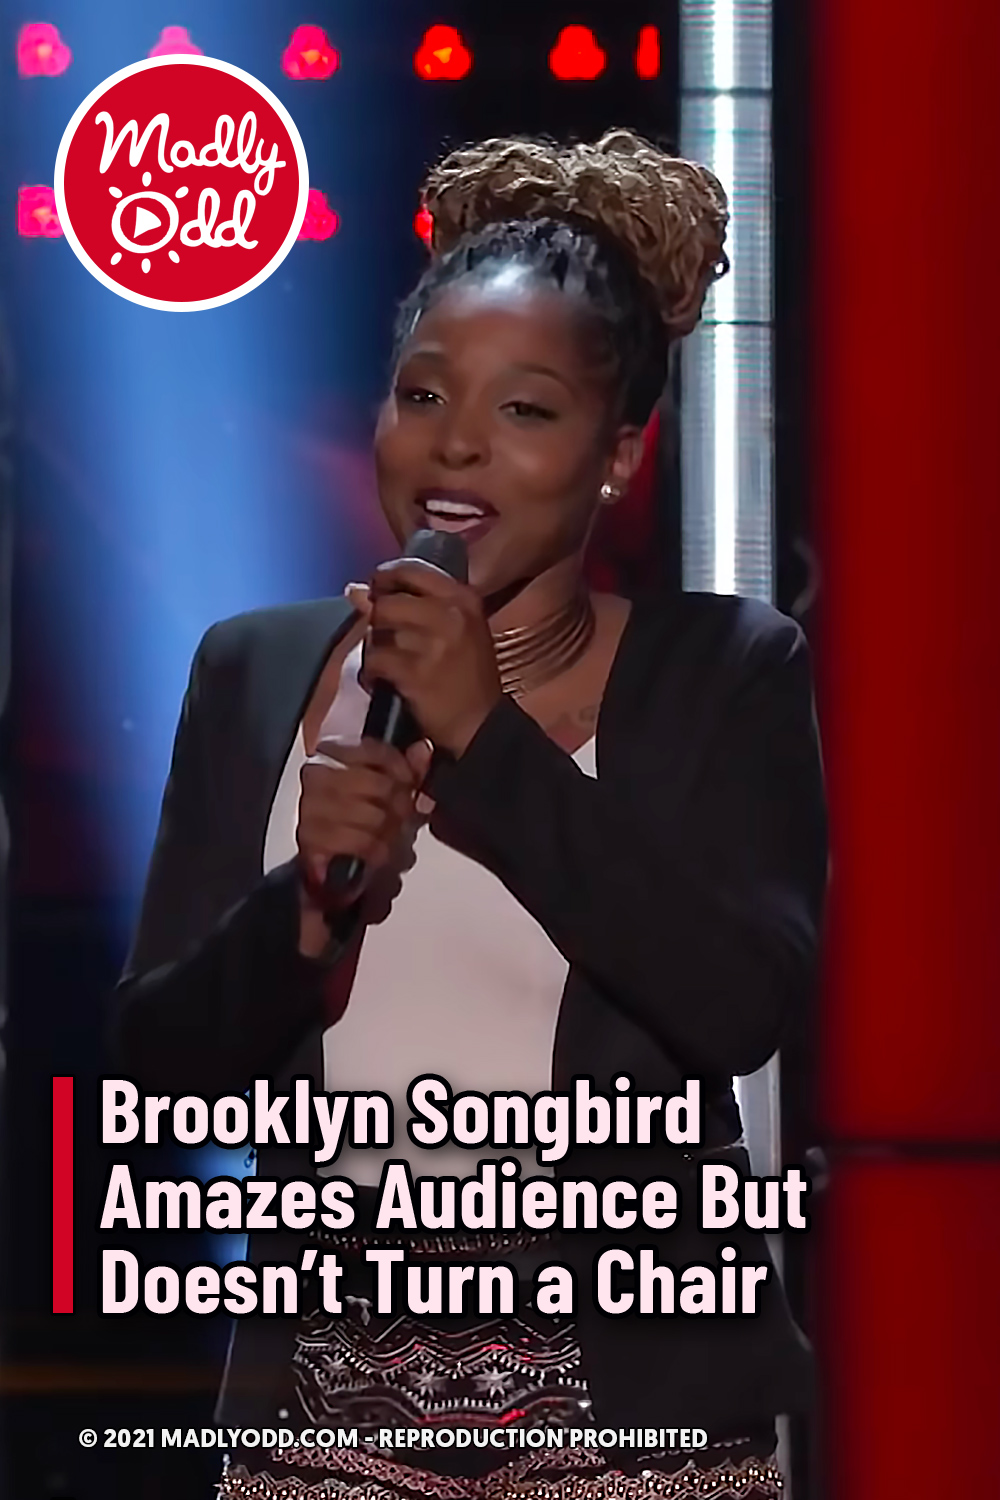 Brooklyn Songbird Amazes Audience But Doesn’t Turn a Chair